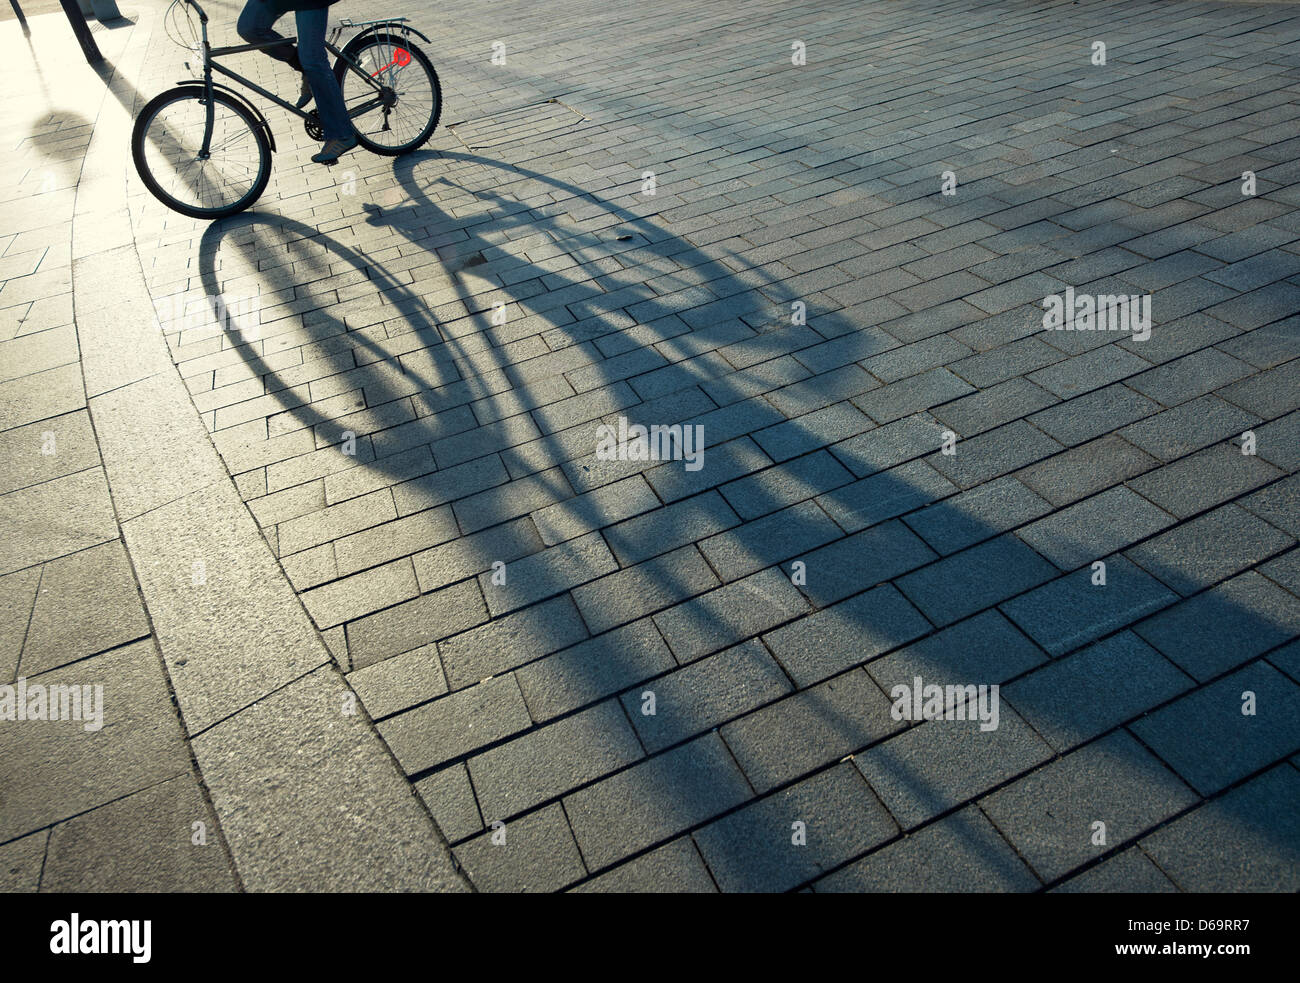 Bicycle casting shadow on city street Stock Photo